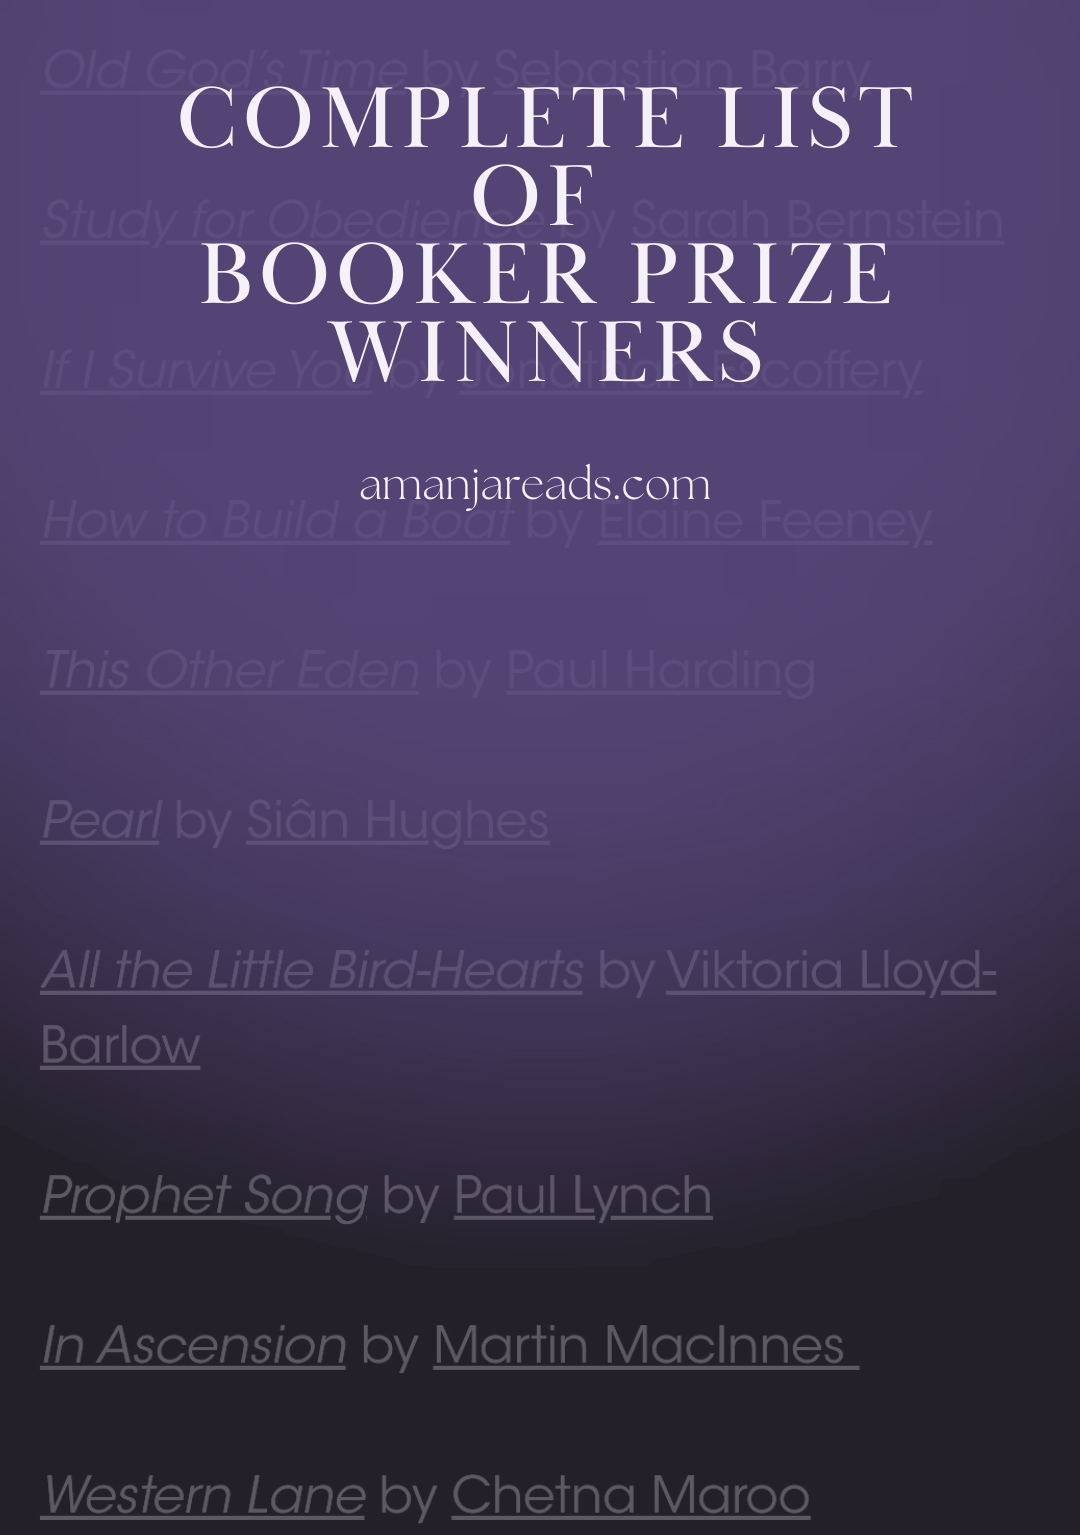 Complete List of Booker Prize Winners